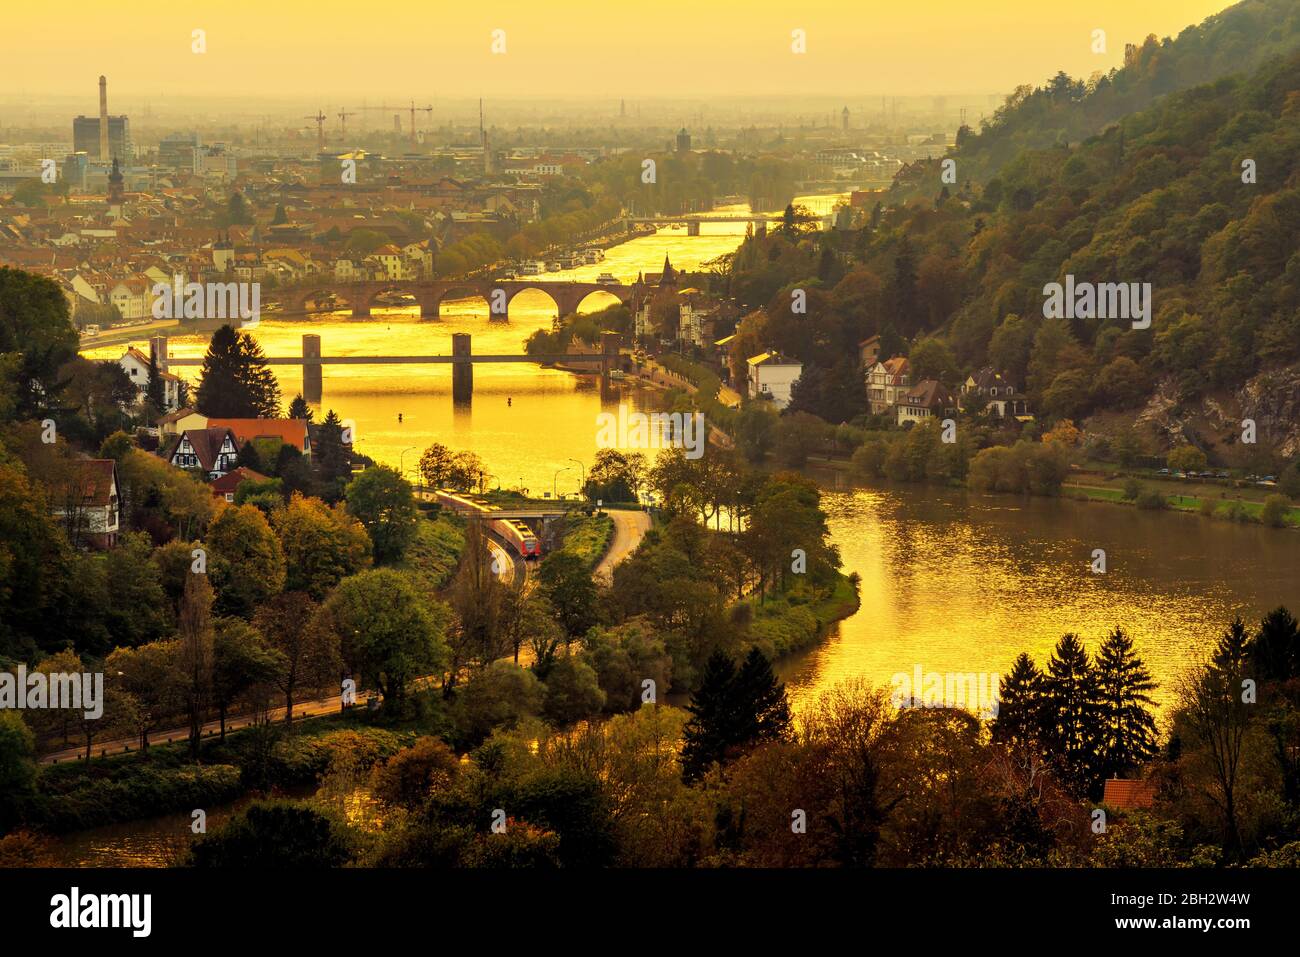 Heidelberg and the Neckar river, Germany, at a gold sunset, shot from above  with a yellow filter to enhance the beautiful romantic mood Stock Photo -  Alamy